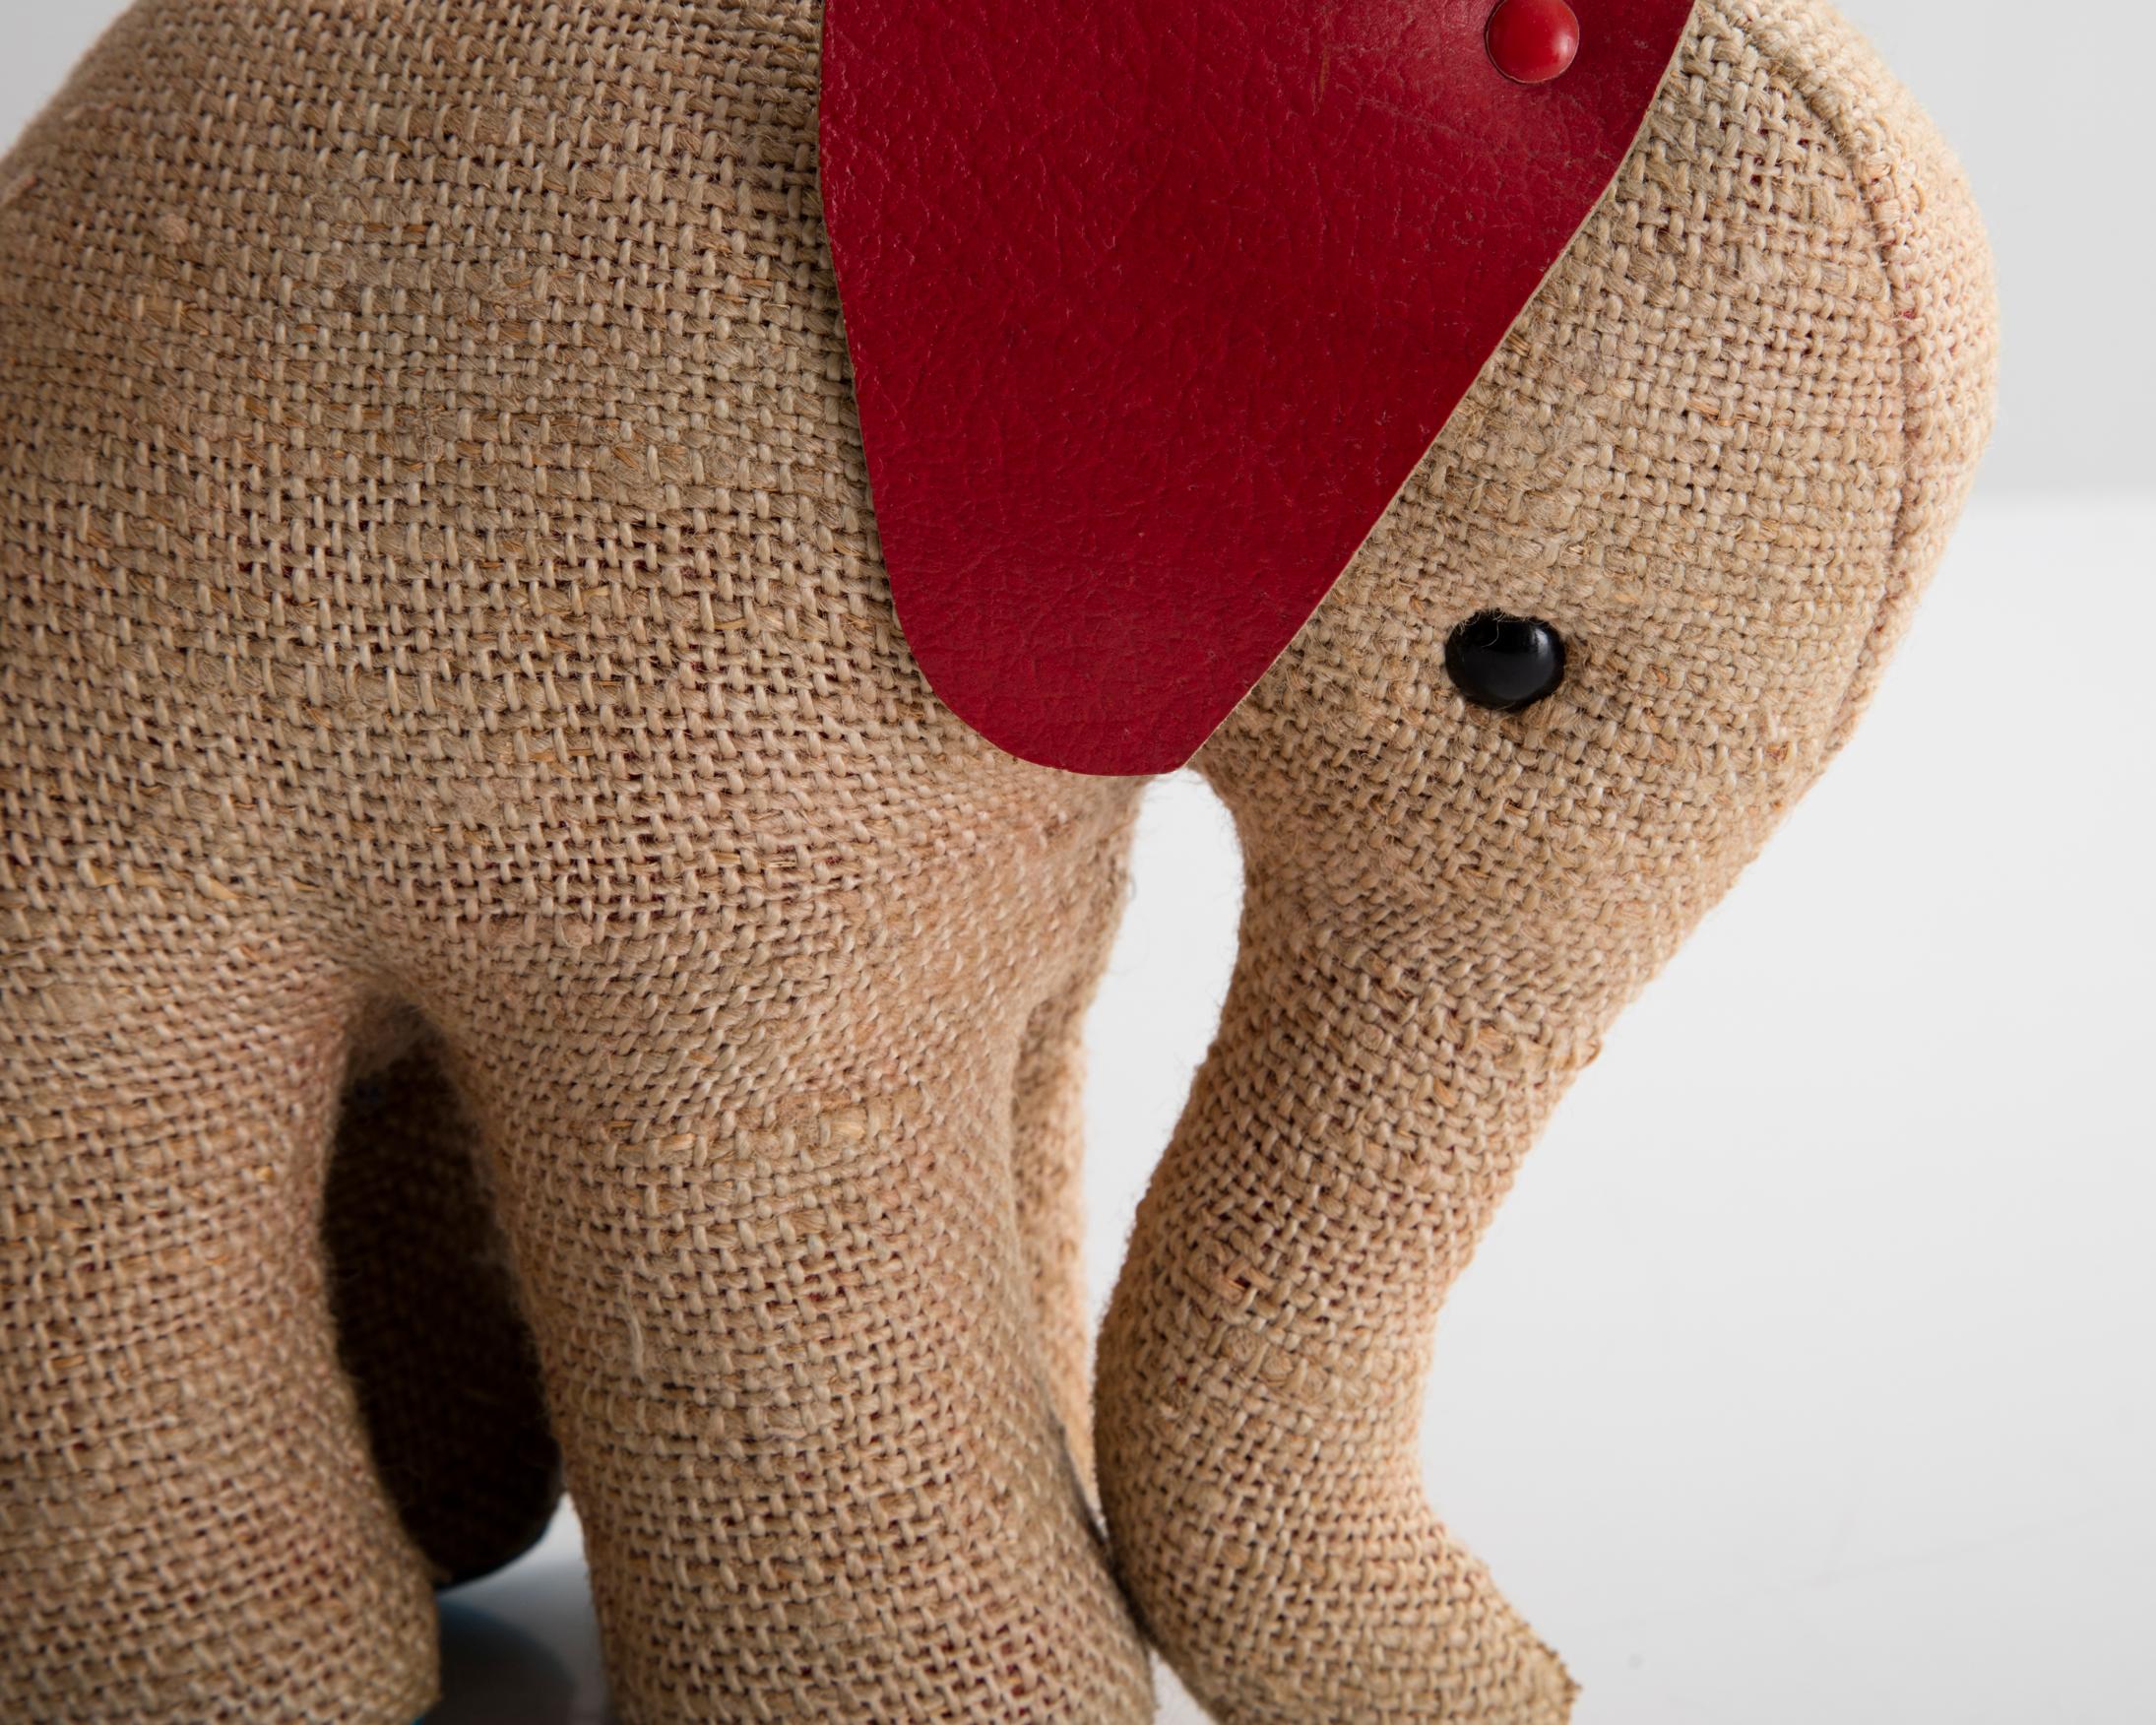 Modern Therapeutic Small Elephant Toy in Jute and Leather by Renate Müller, circa 1969 For Sale